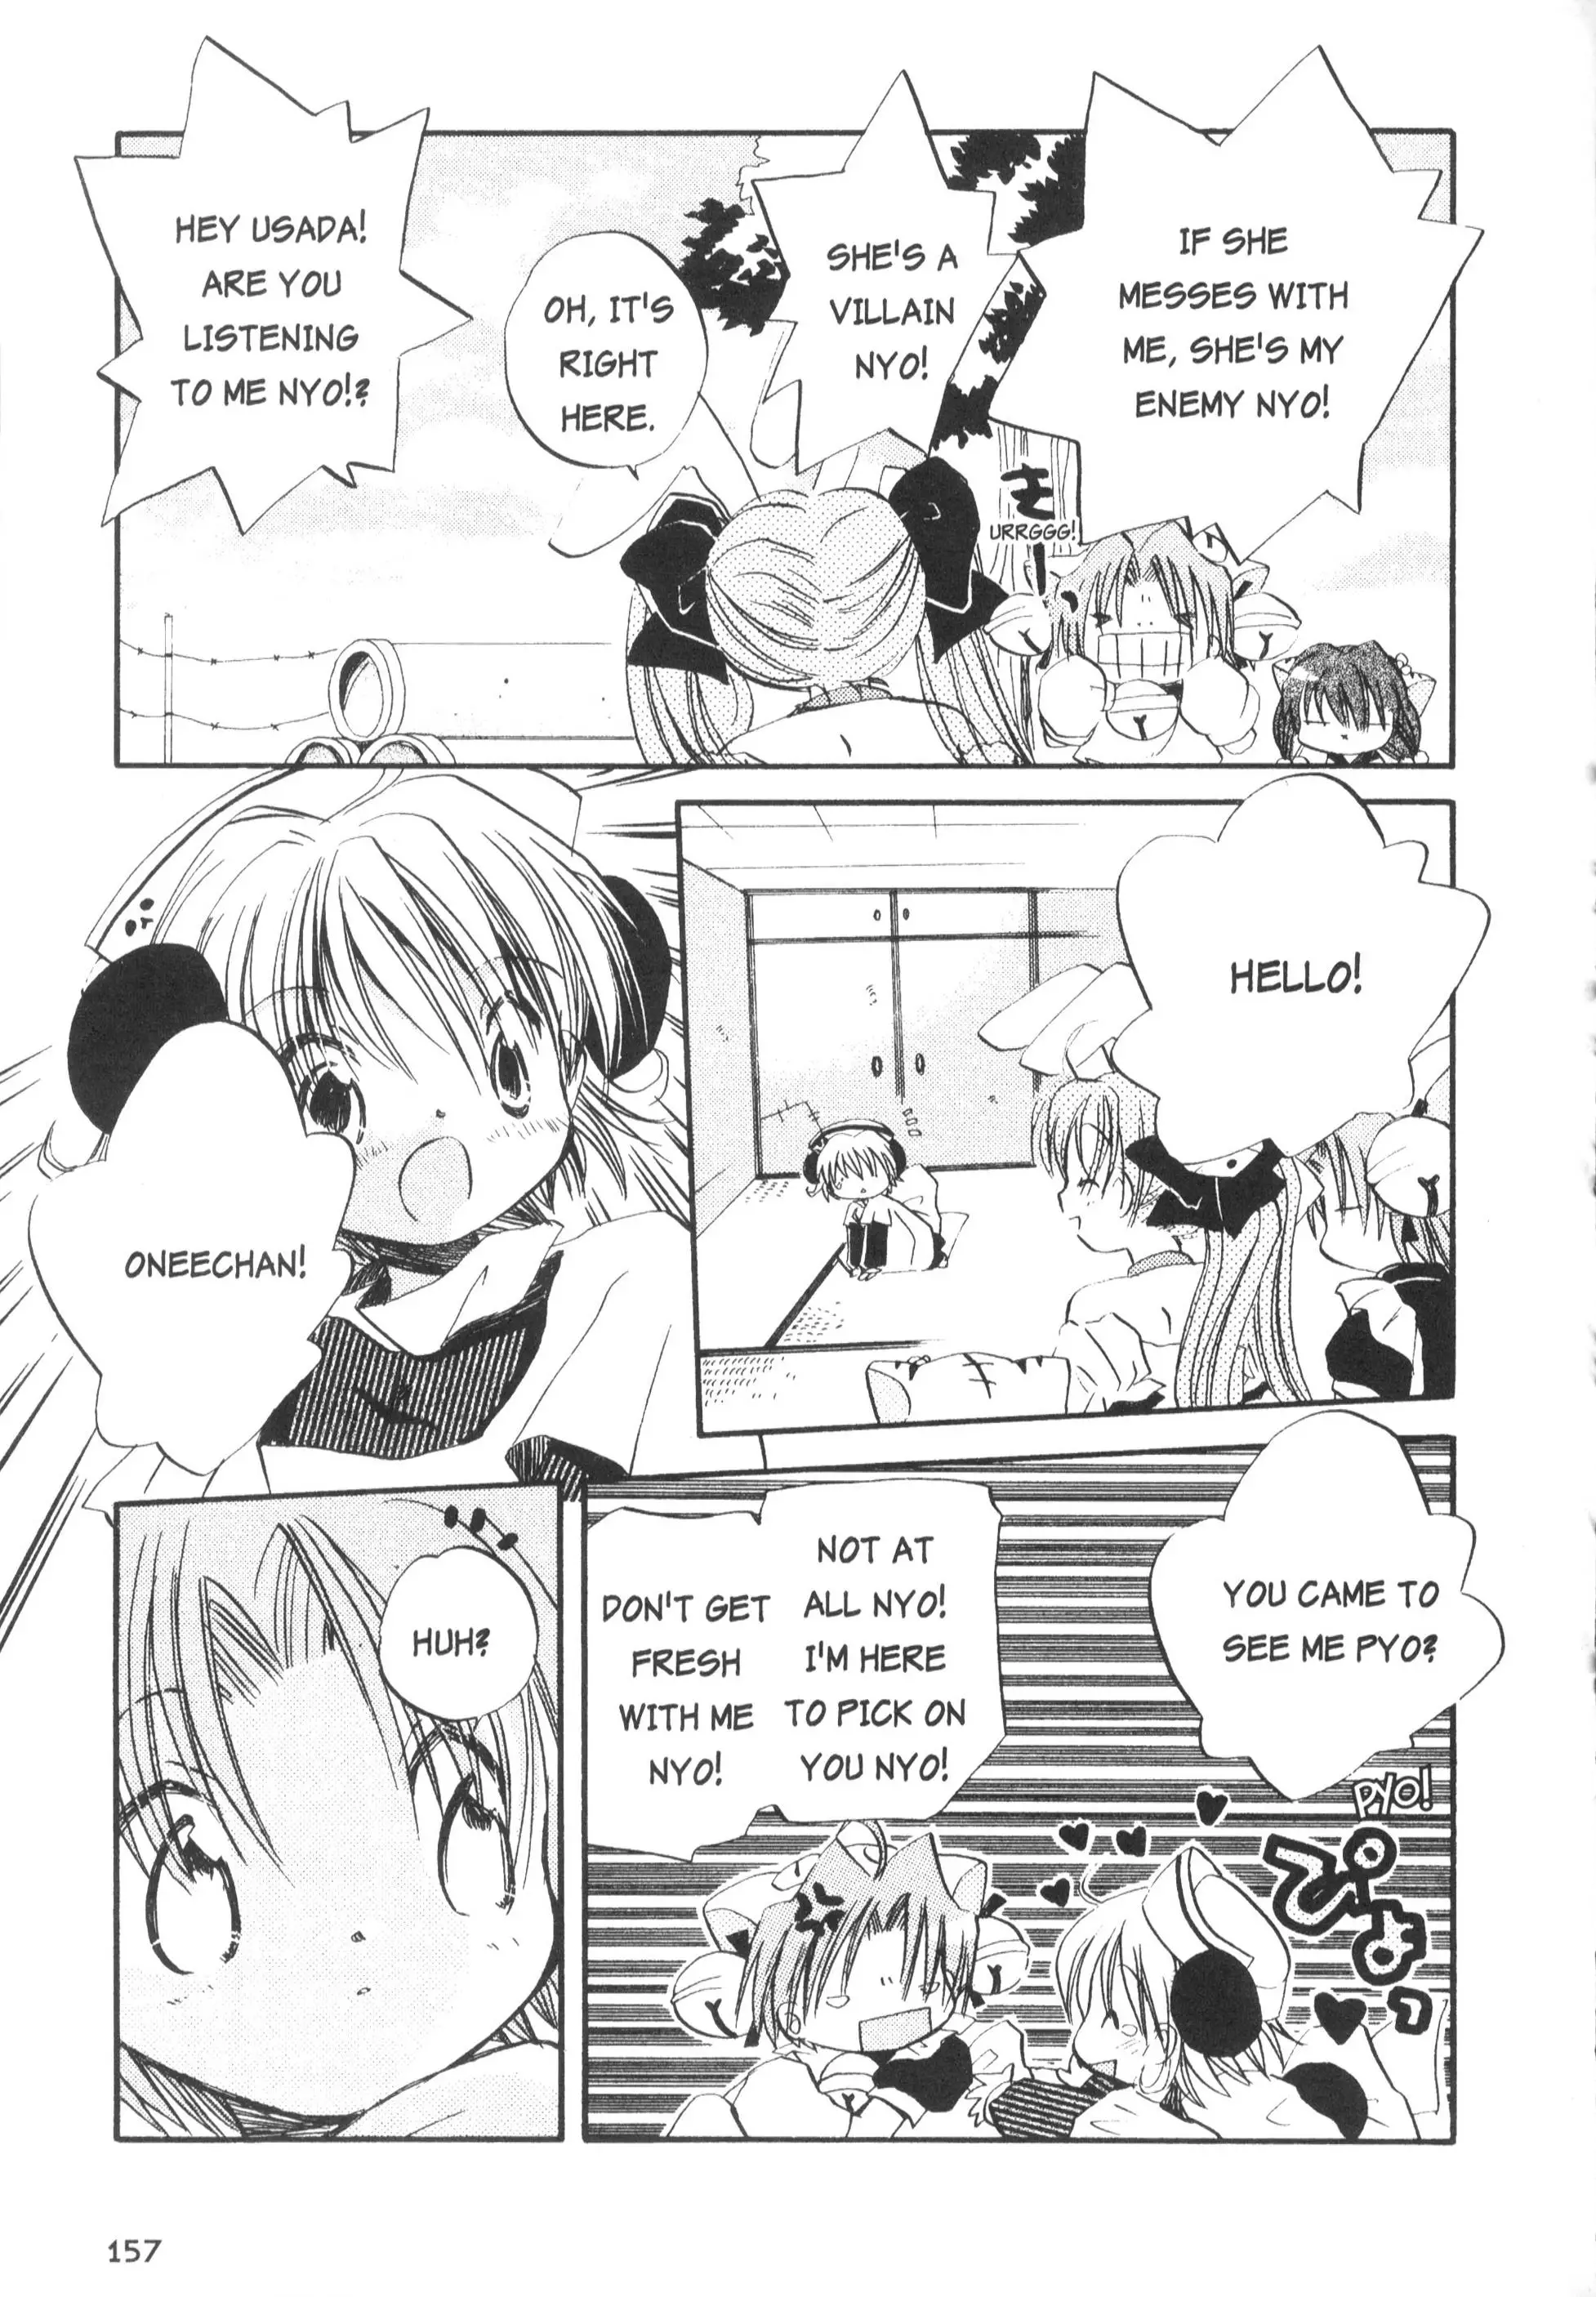 Di Gi Charat Theater: Leave It To Piyoko! - 14 page 7-a450af47